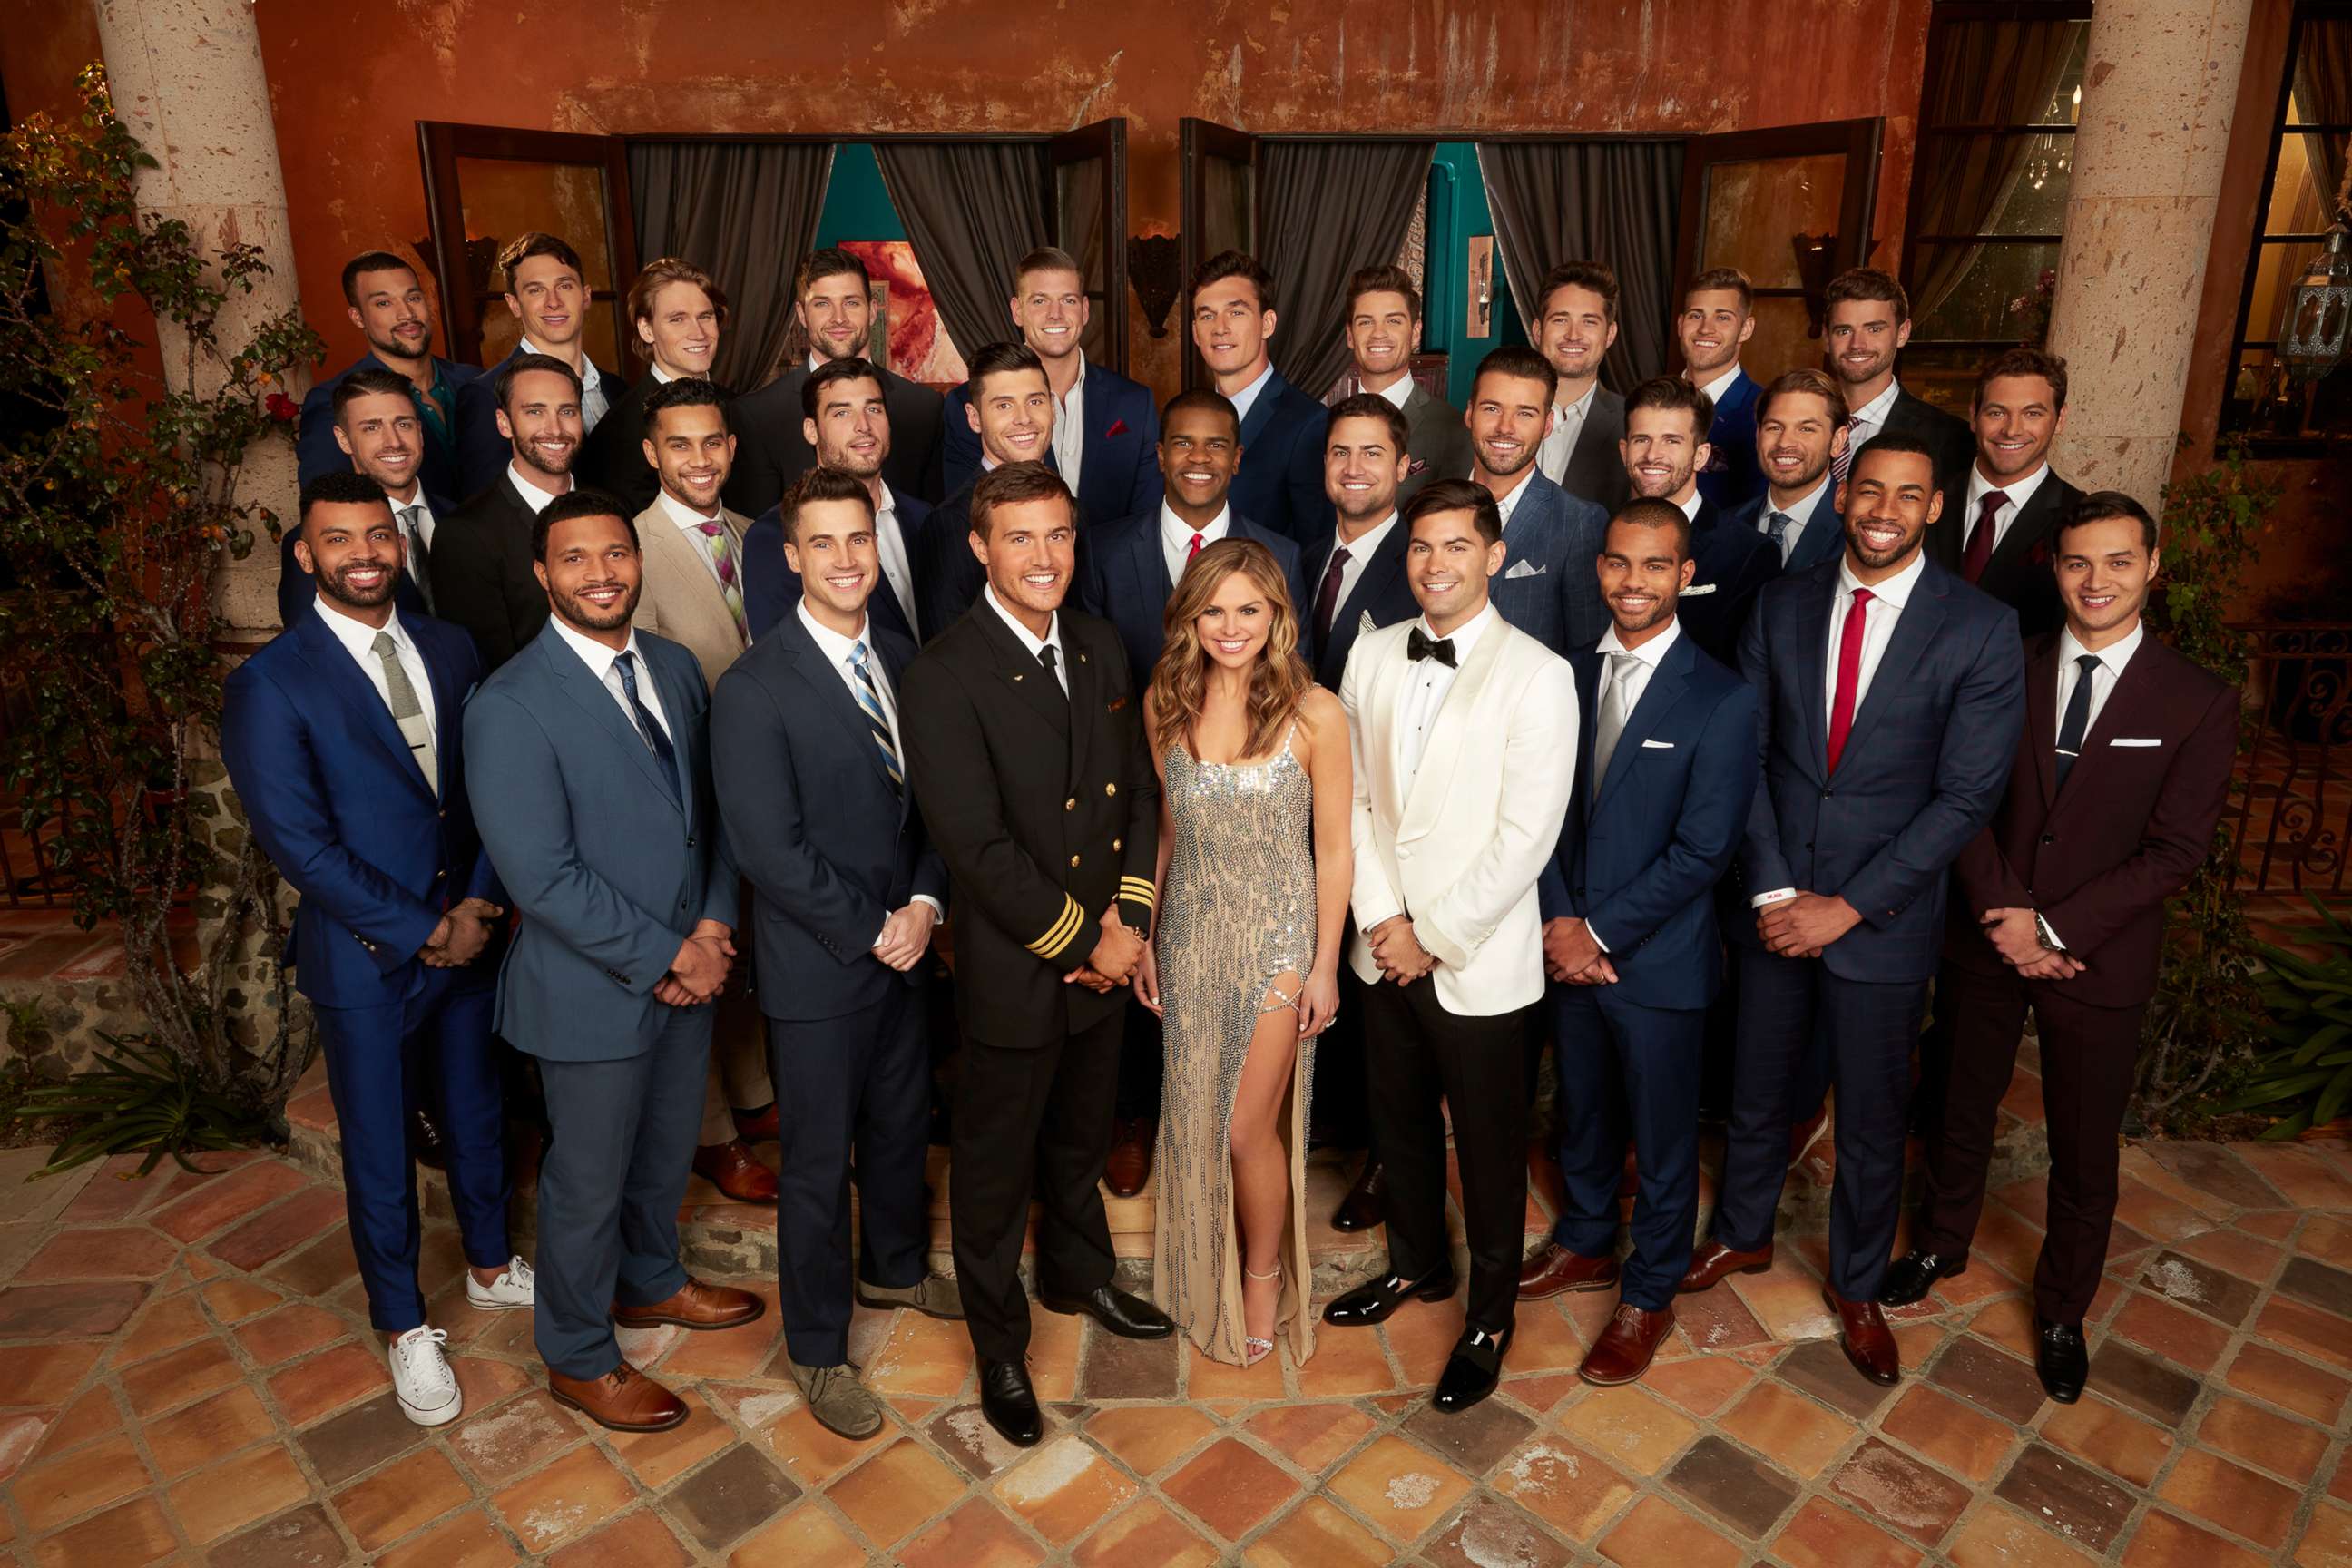 PHOTO: Hannah Brown pictured with the contestants on the milestone 15th season of ABC's "The Bachelorette."